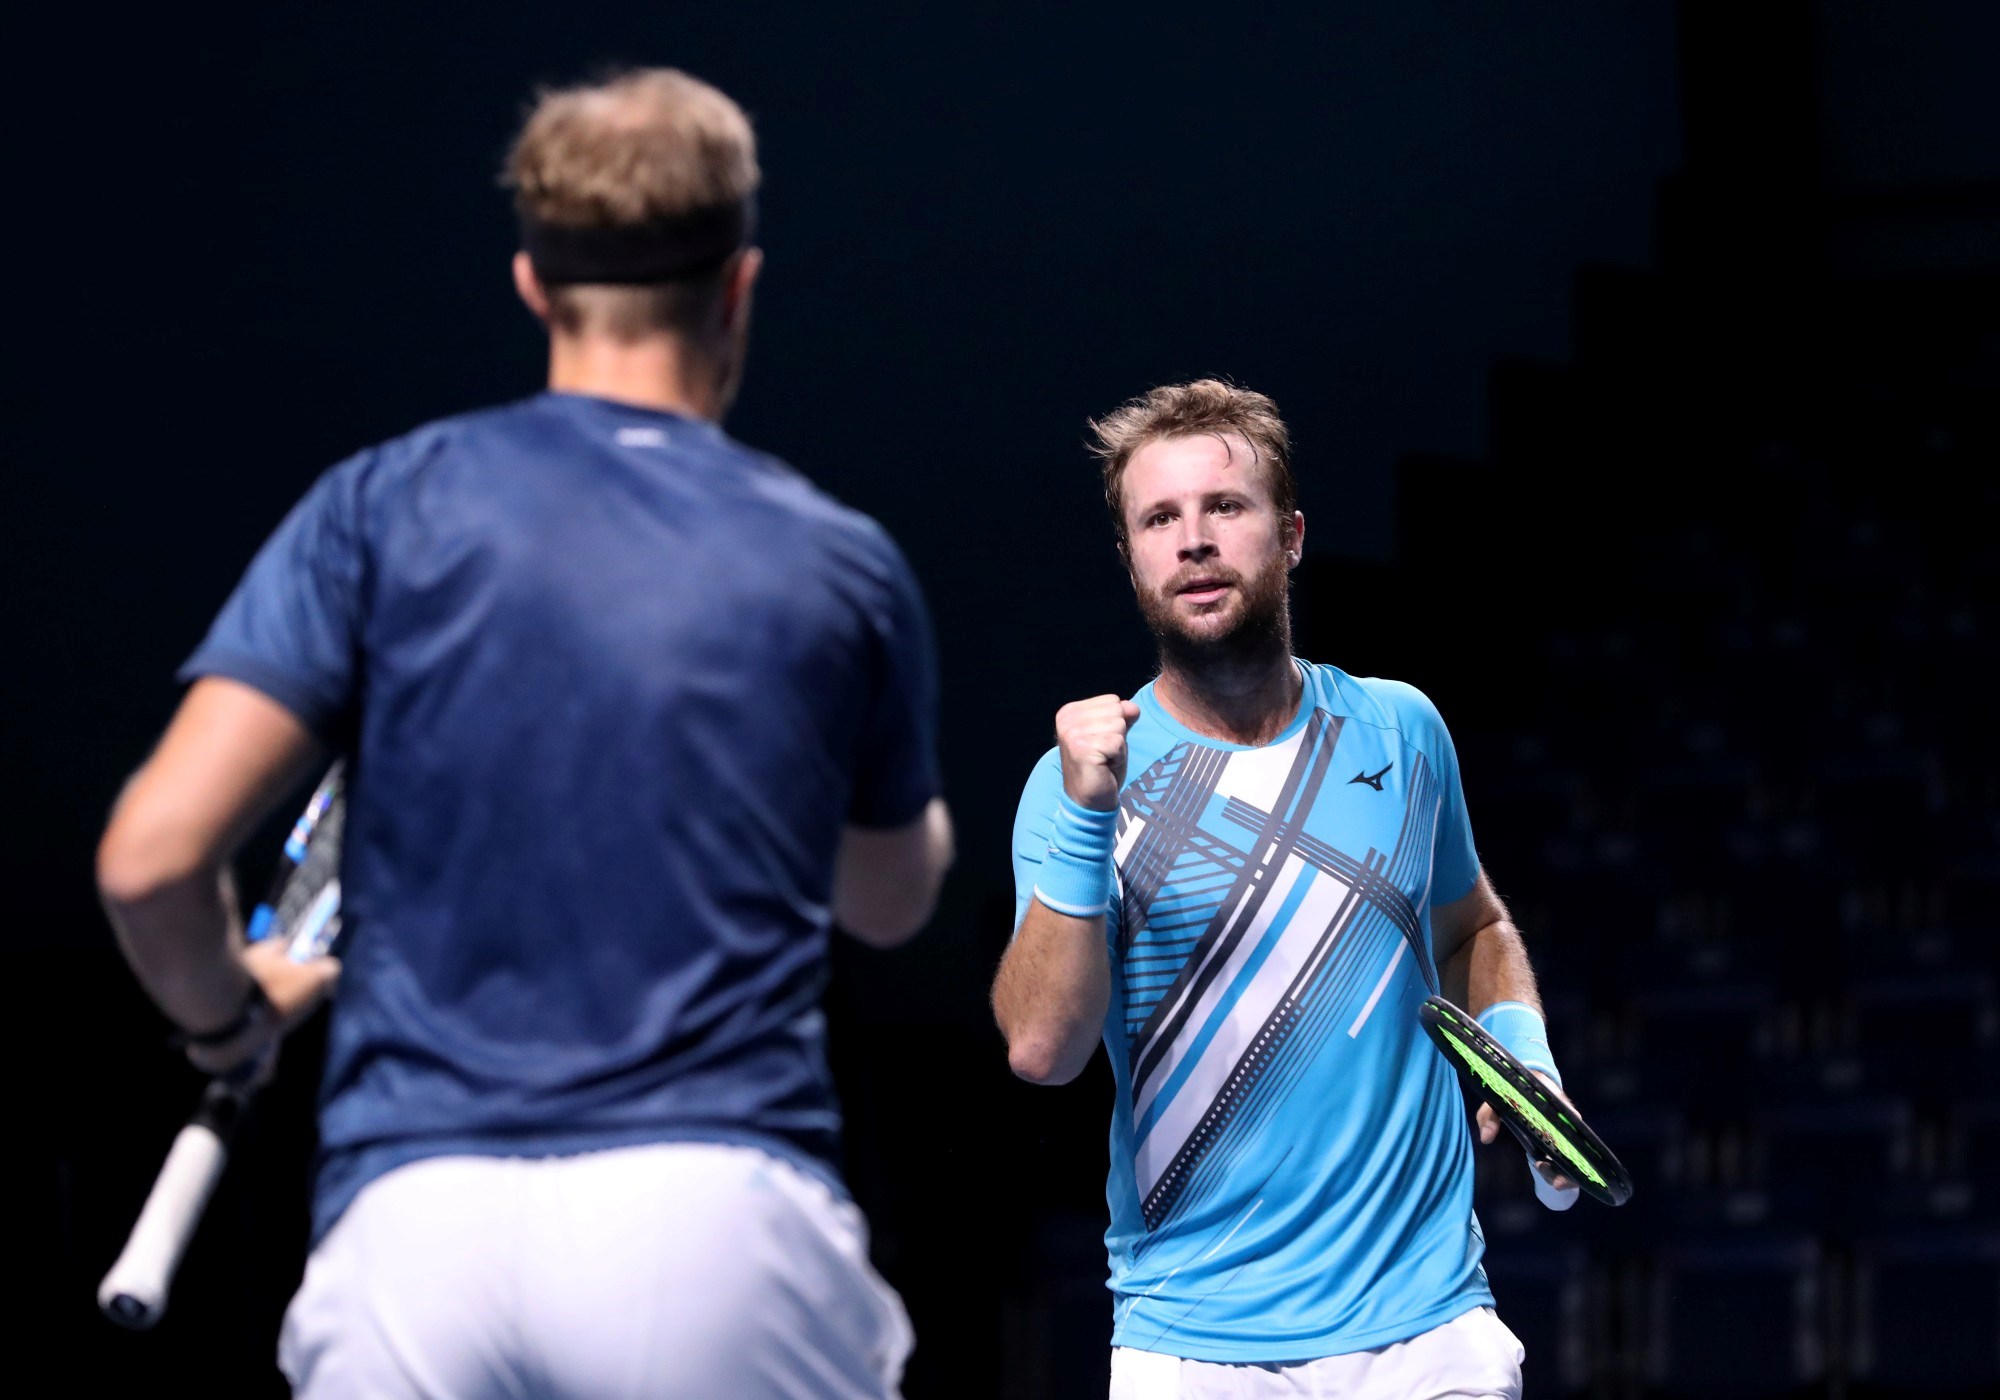 Luke Bambridge (R) and Dominic Inglot of Great Britain celebrate a point in their Men's Doubles Quarterfinals match against Jamie Cerretani of the United States and Adil Shamasdin of Canada on day four of the Singapore Tennis Open at the OCBC Arena on February 25, 2021 